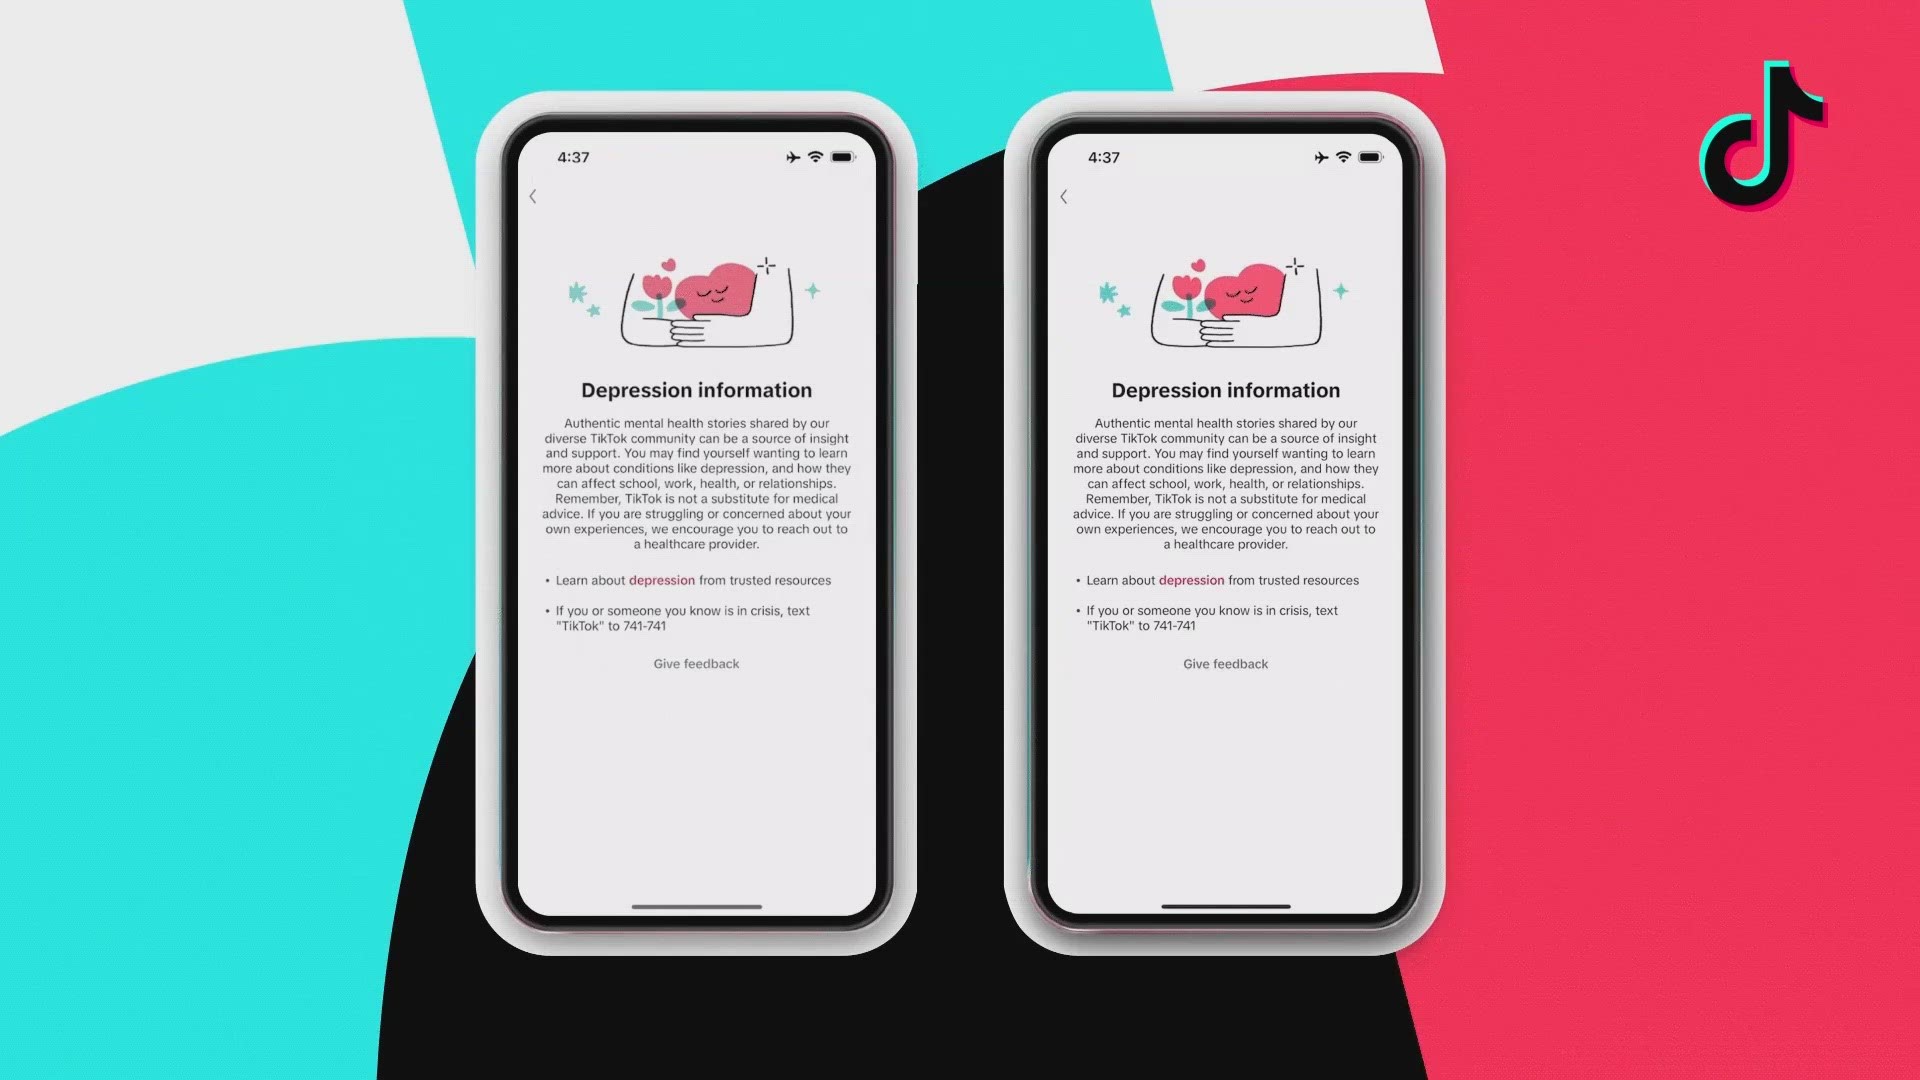 Starting Oct. 10, World Mental Health Awareness Day, TikTok searches for mental health issues will link to Cleveland Clinic and National Institute of Mental Health.